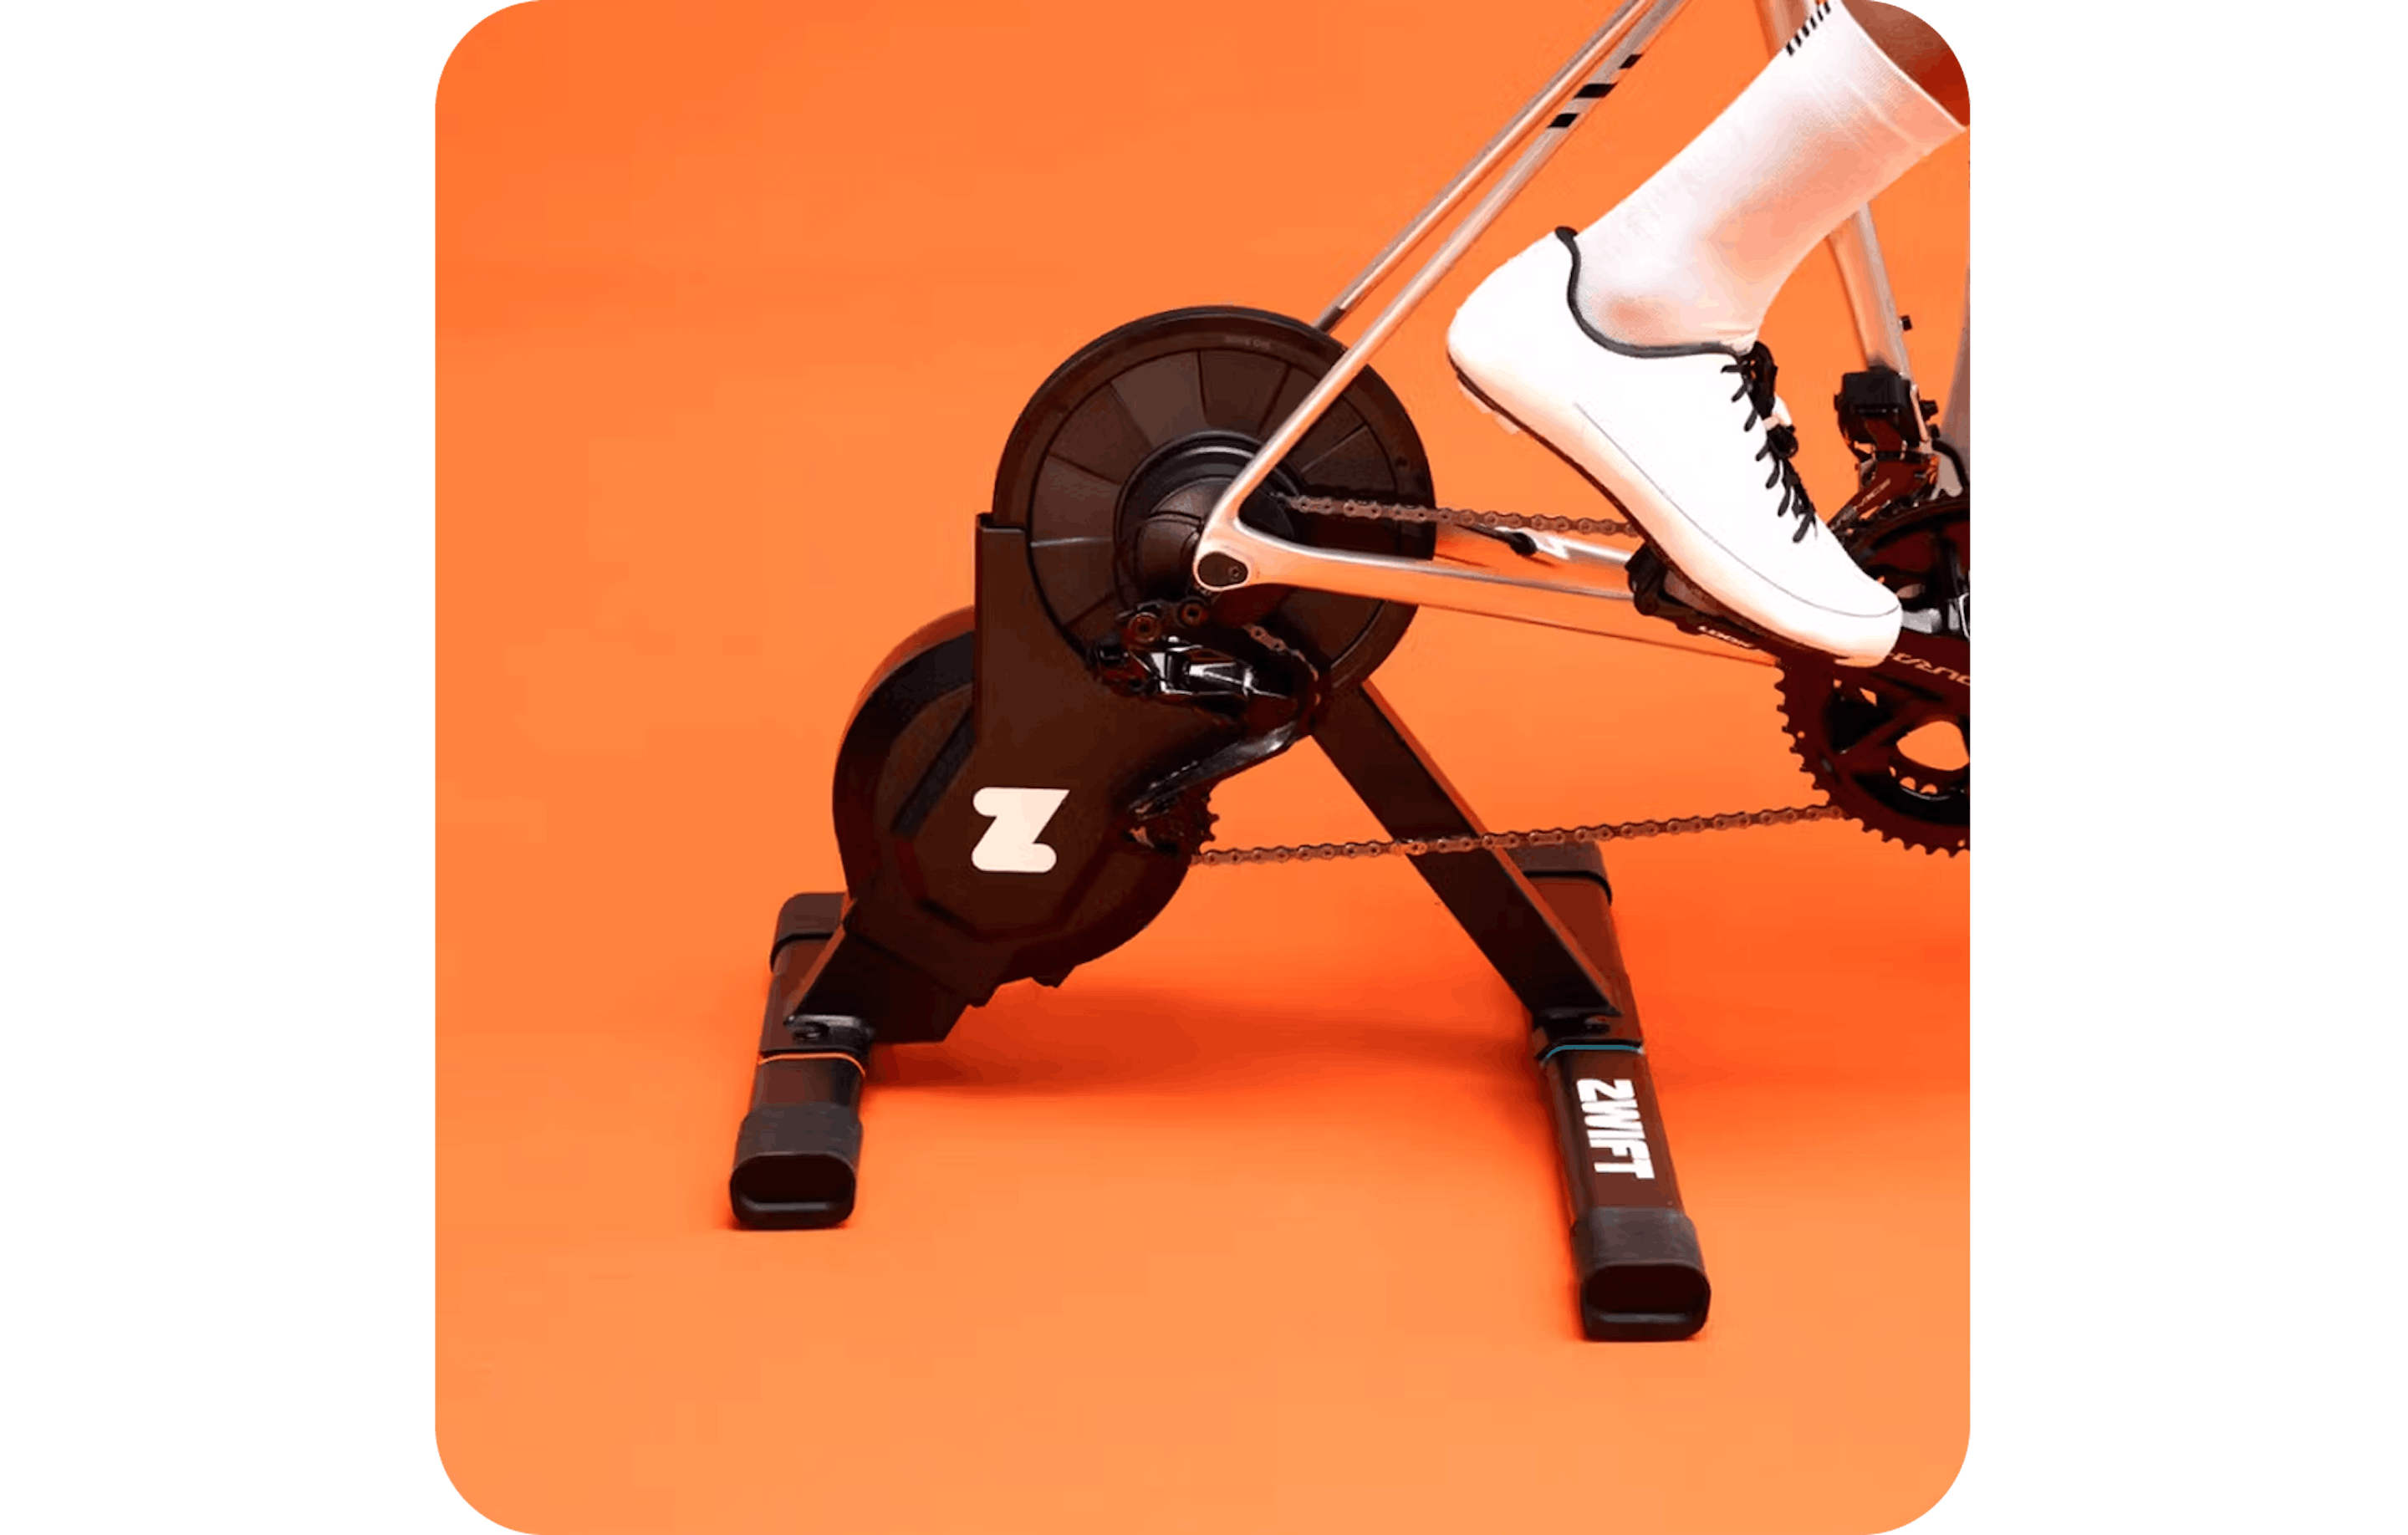 New Zwift Hub One  The Latest Smart Trainer For Indoor Cycling